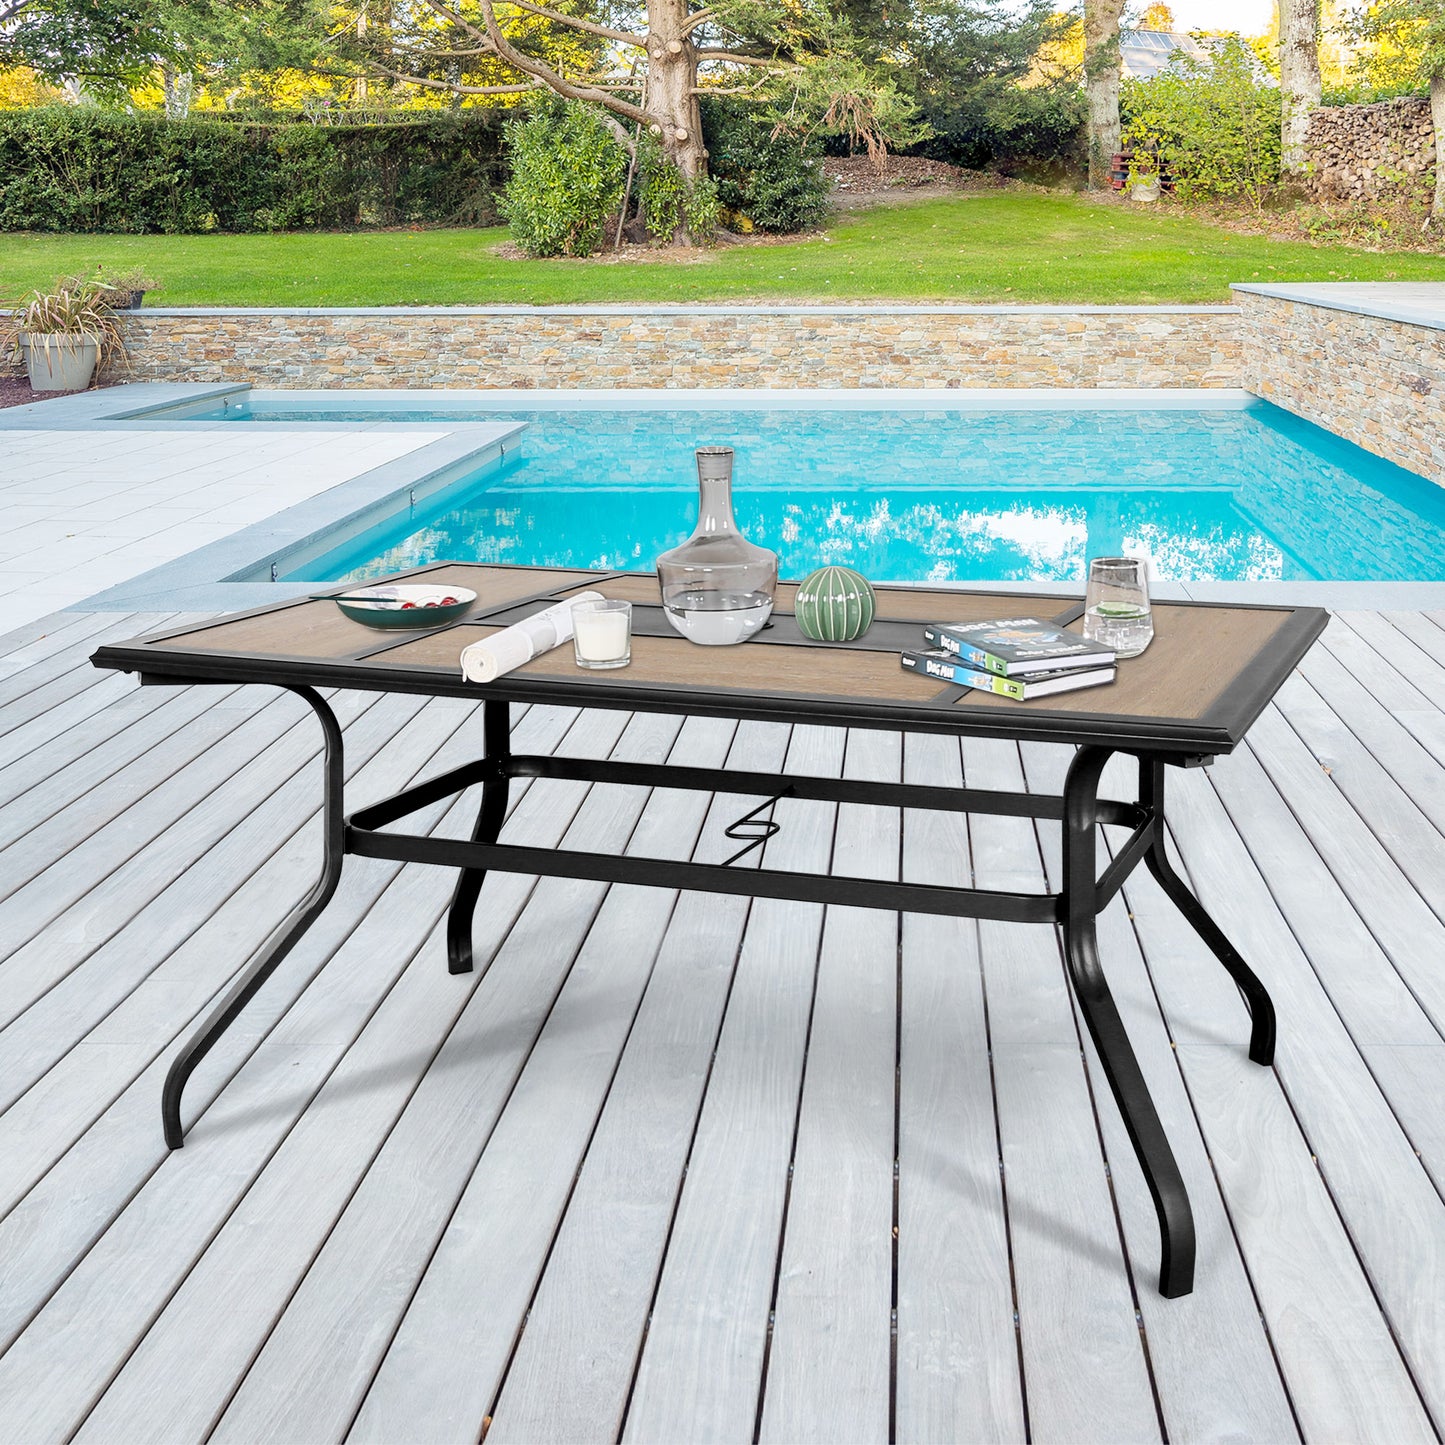 Outdoor Dining Table Patio Rectangular Wood Like Top Backyard Table with Umbrella Hole